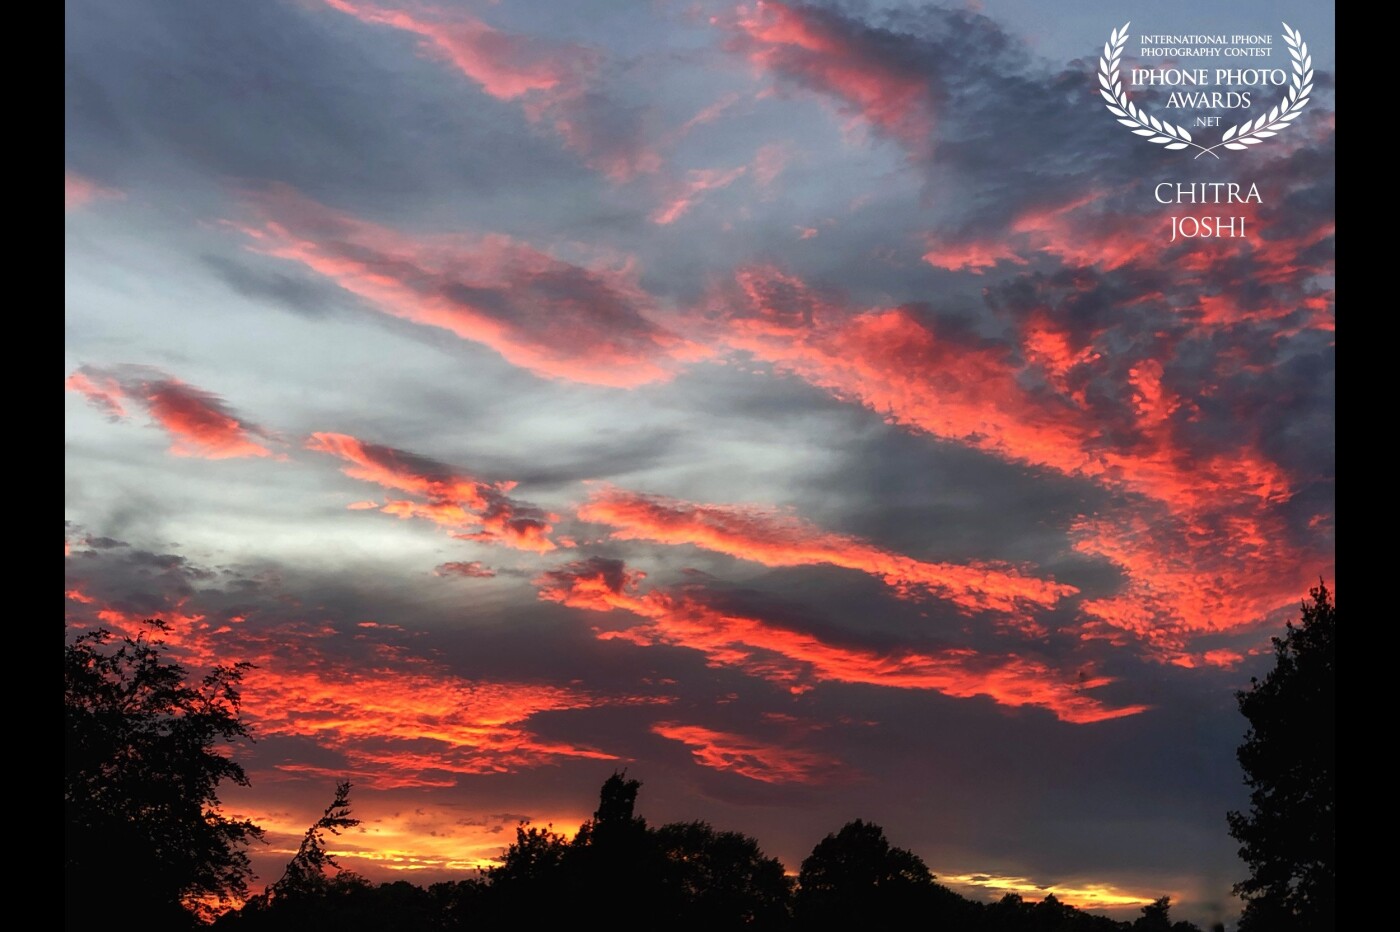 As a sunset lover, I always admire the hues and shades the clouds reflect. This colorful clouds scene in the evening got me reminded of the famous quote "Red sky at night, shepherd's delight. Red sky in the morning, shepherd's warning."